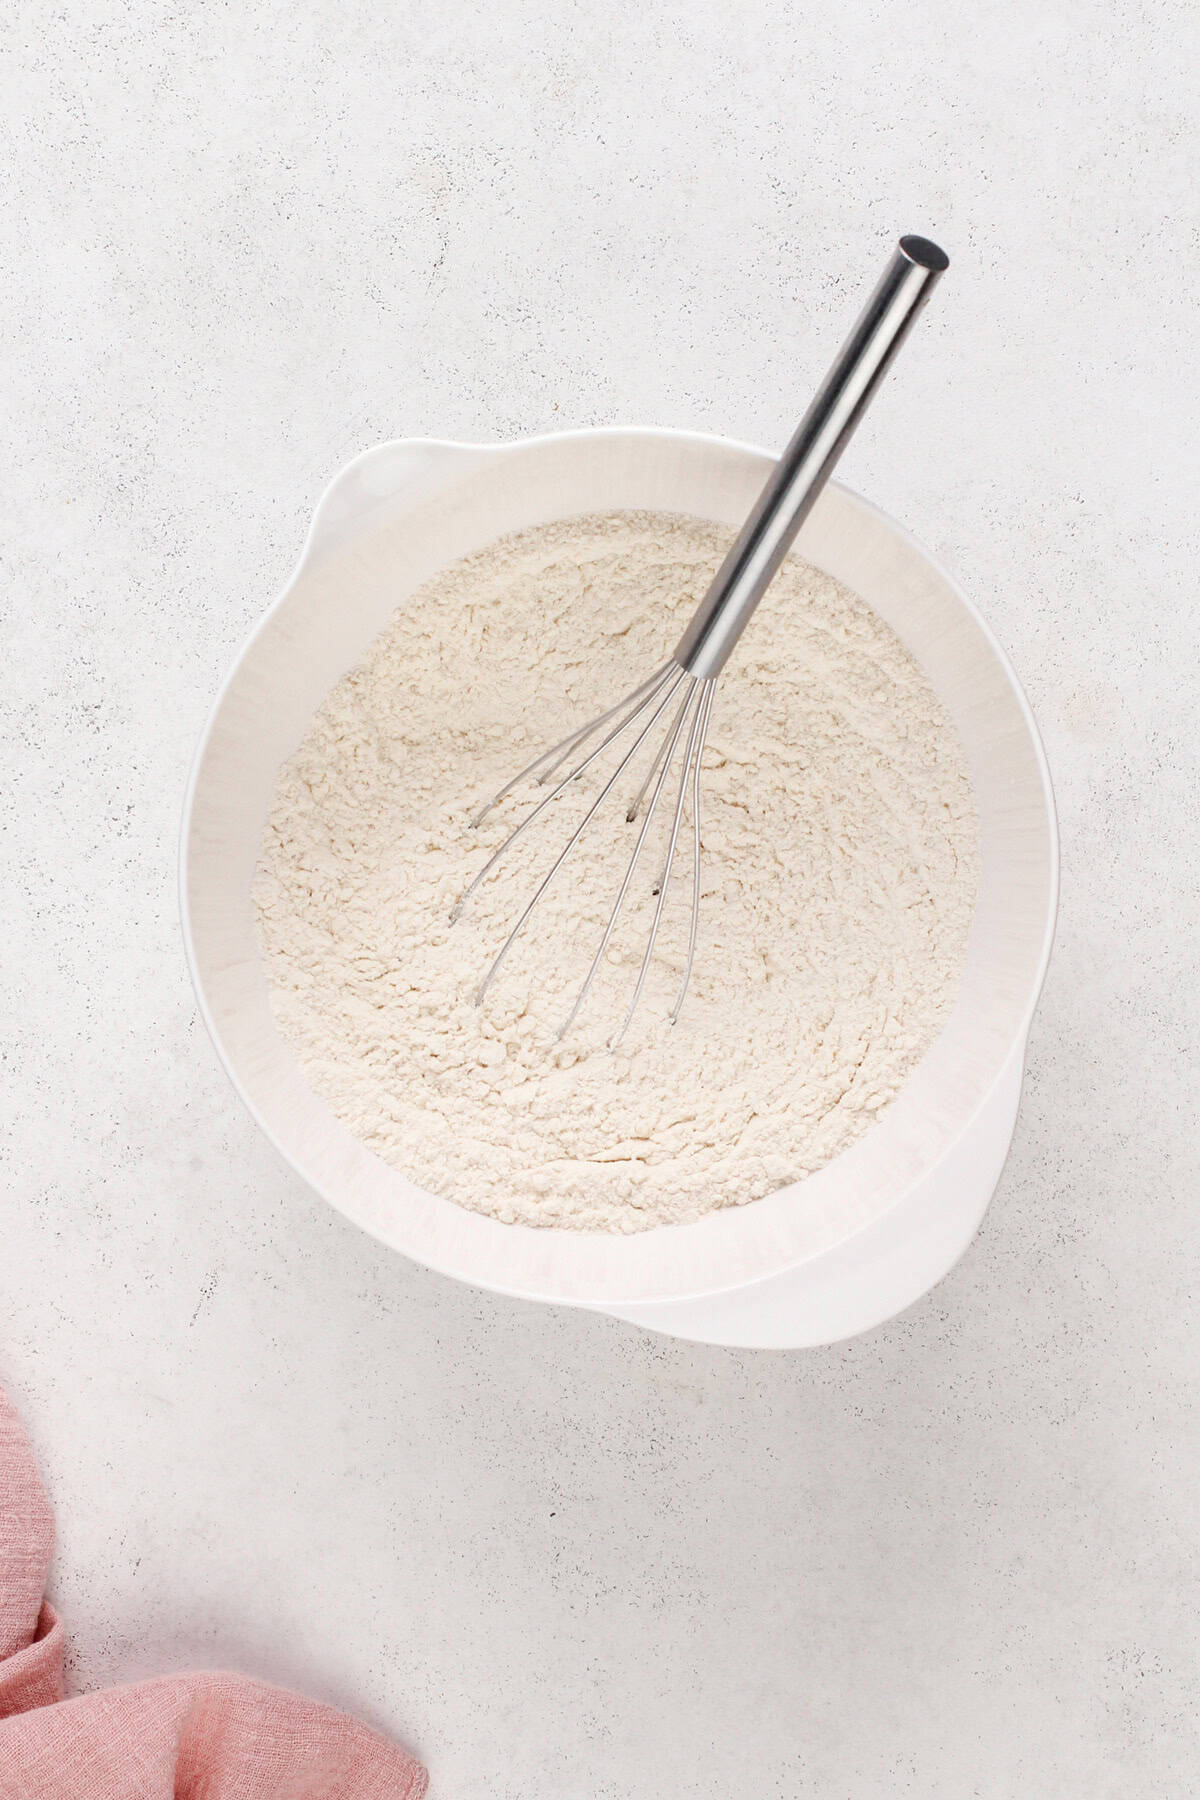 Dry ingredients for easy sugar cookies whisked together in a white bowl.